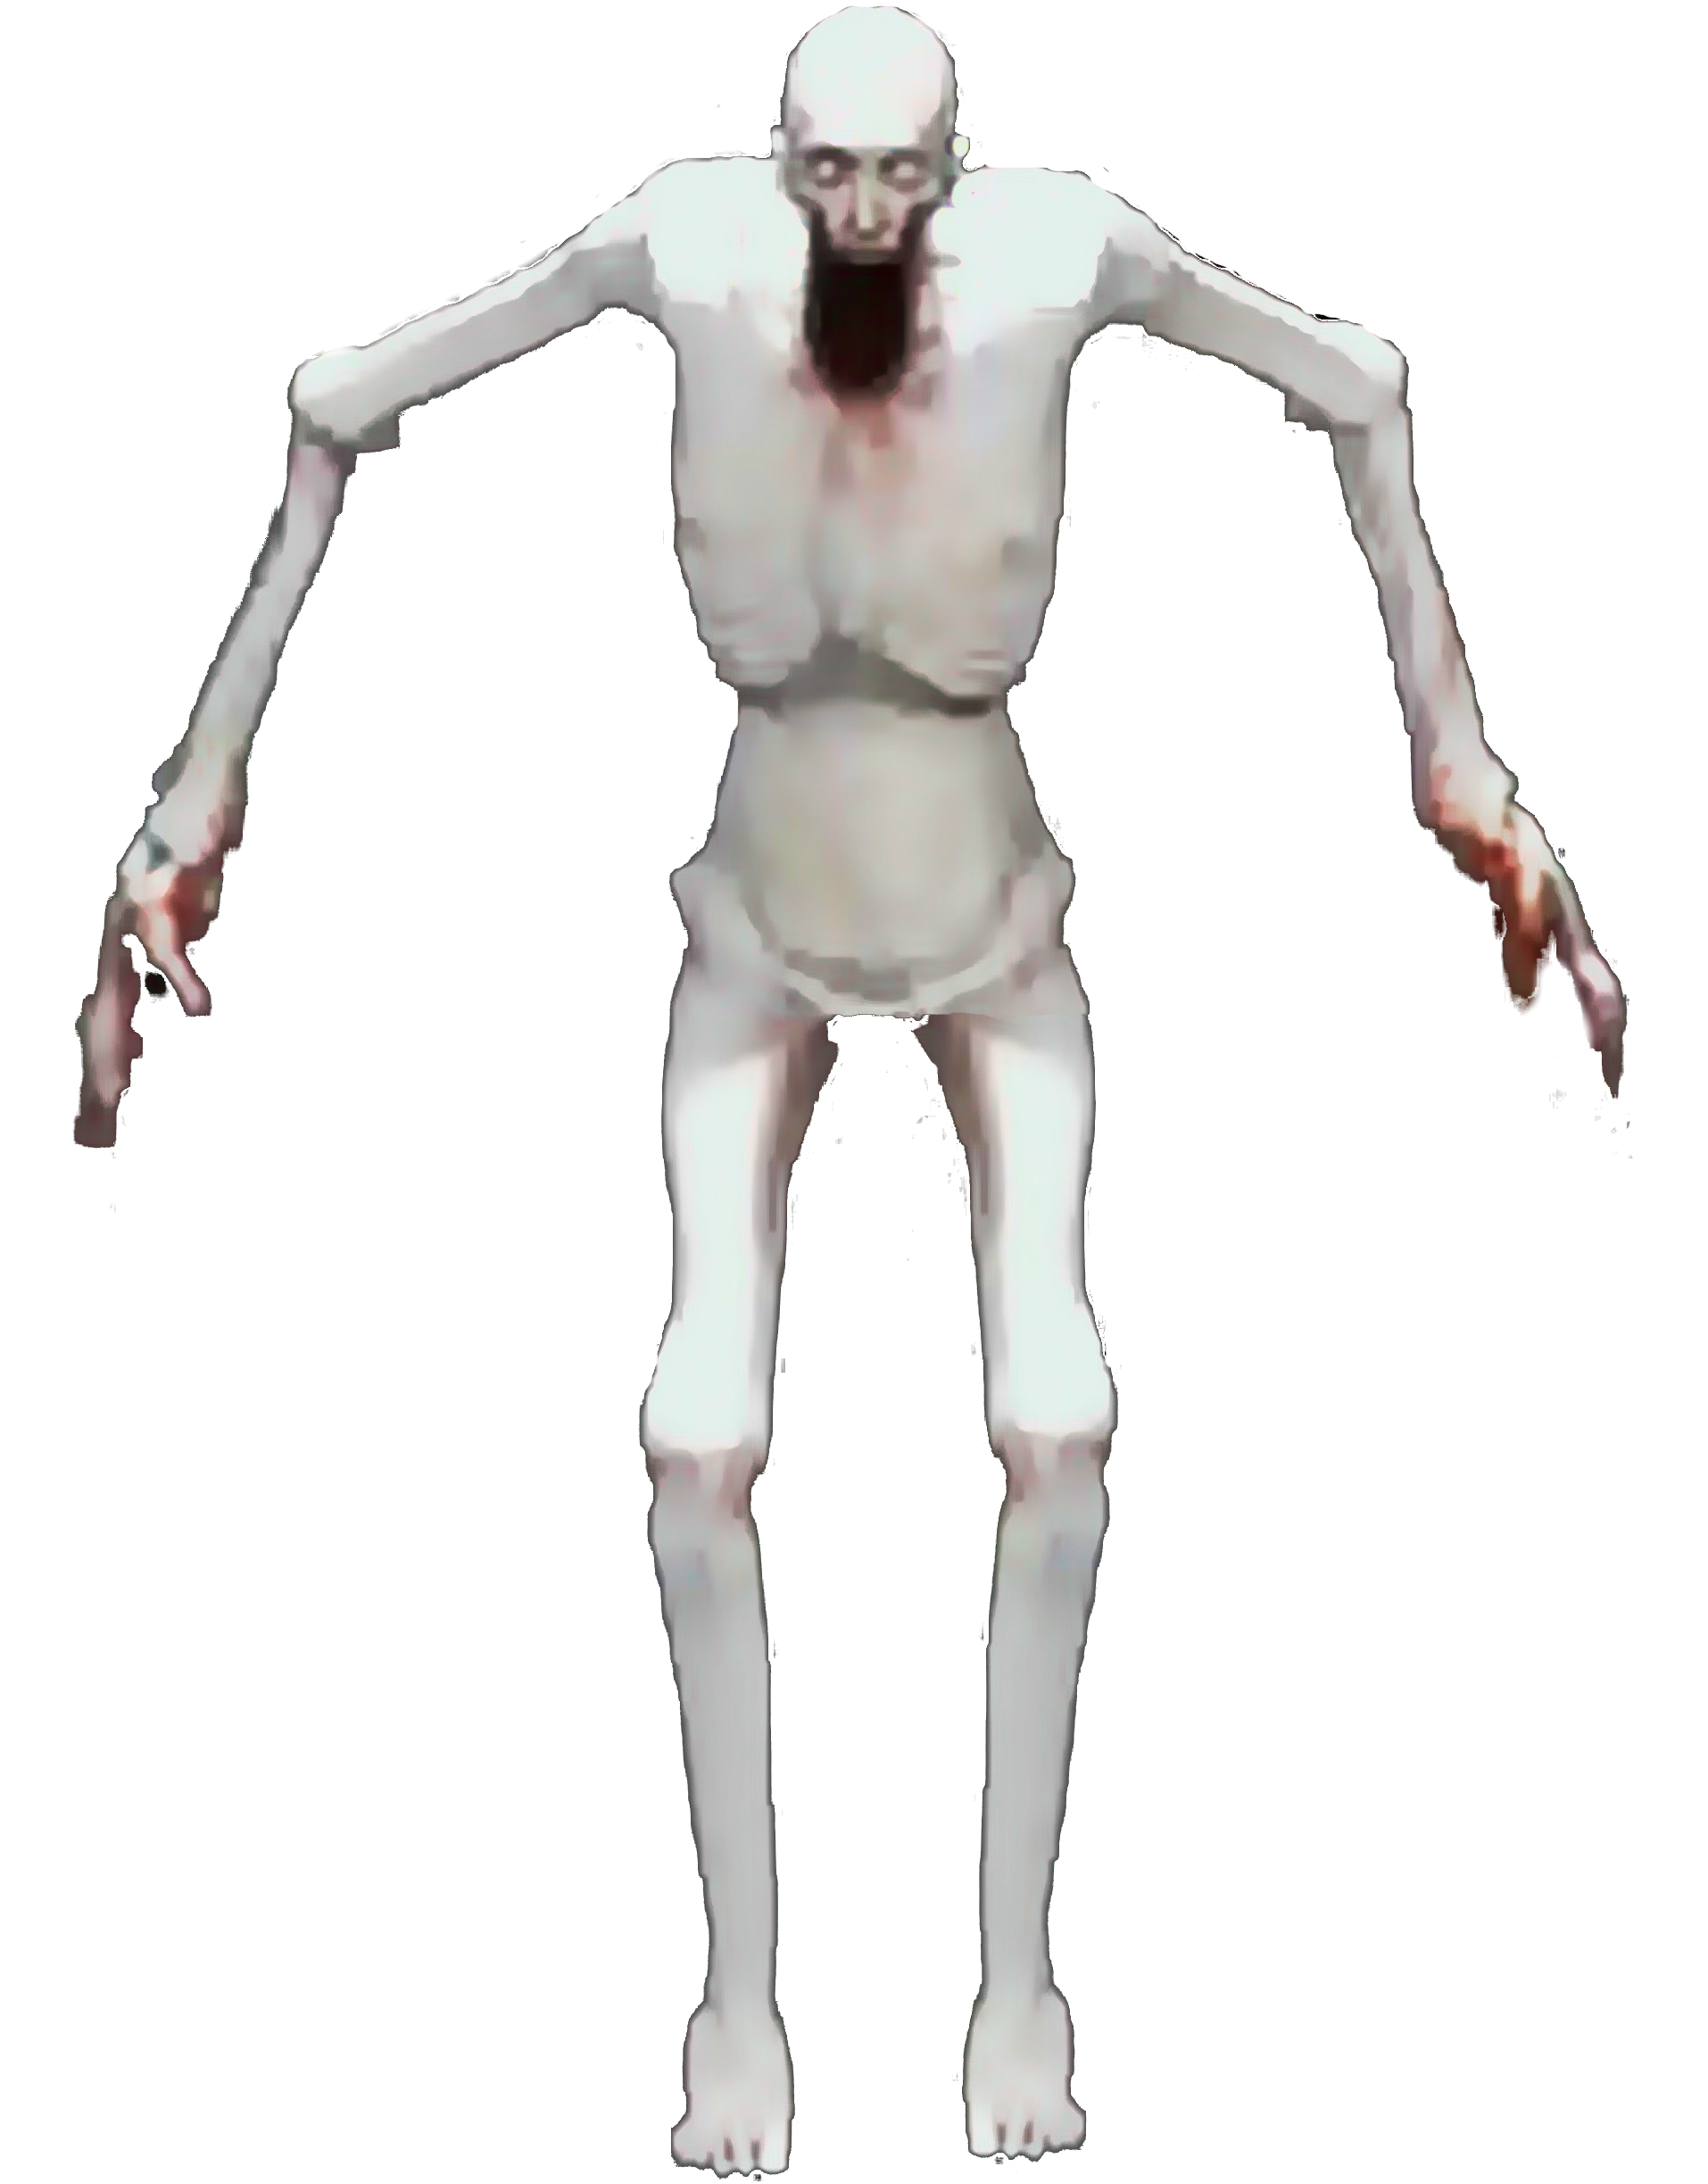 What is SCP-173's true form, and how did it get trapped in a